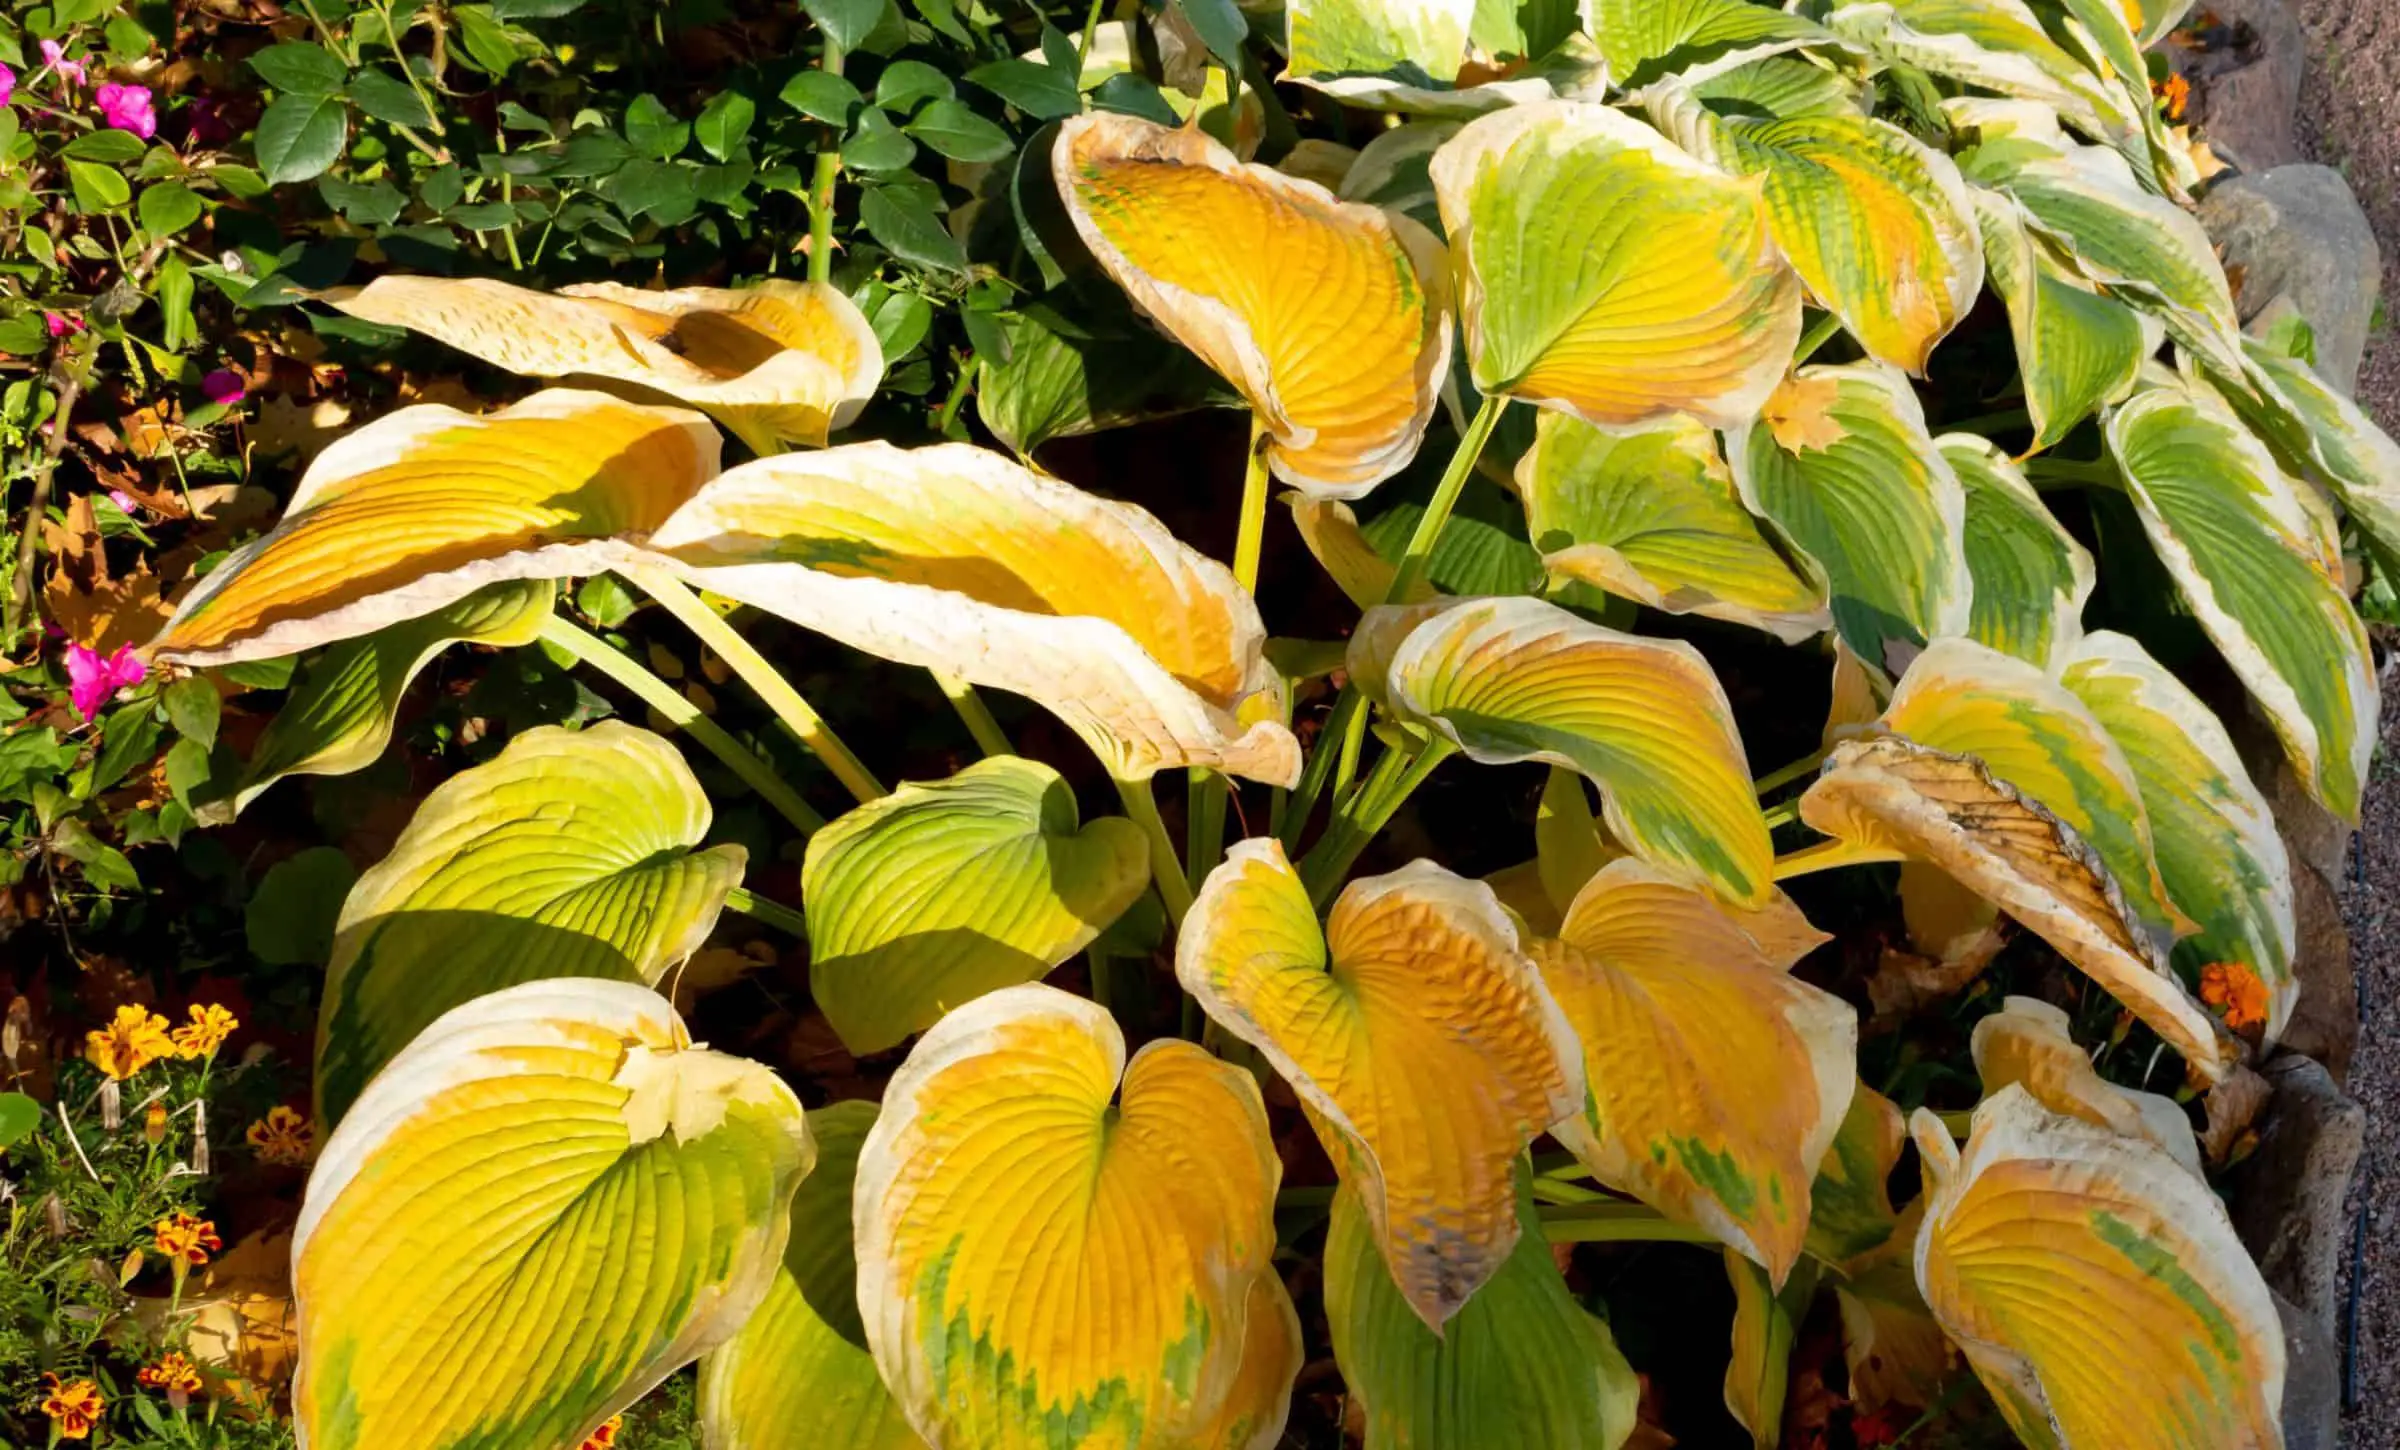 Hosta going dormant in the fall with leaves yellowing